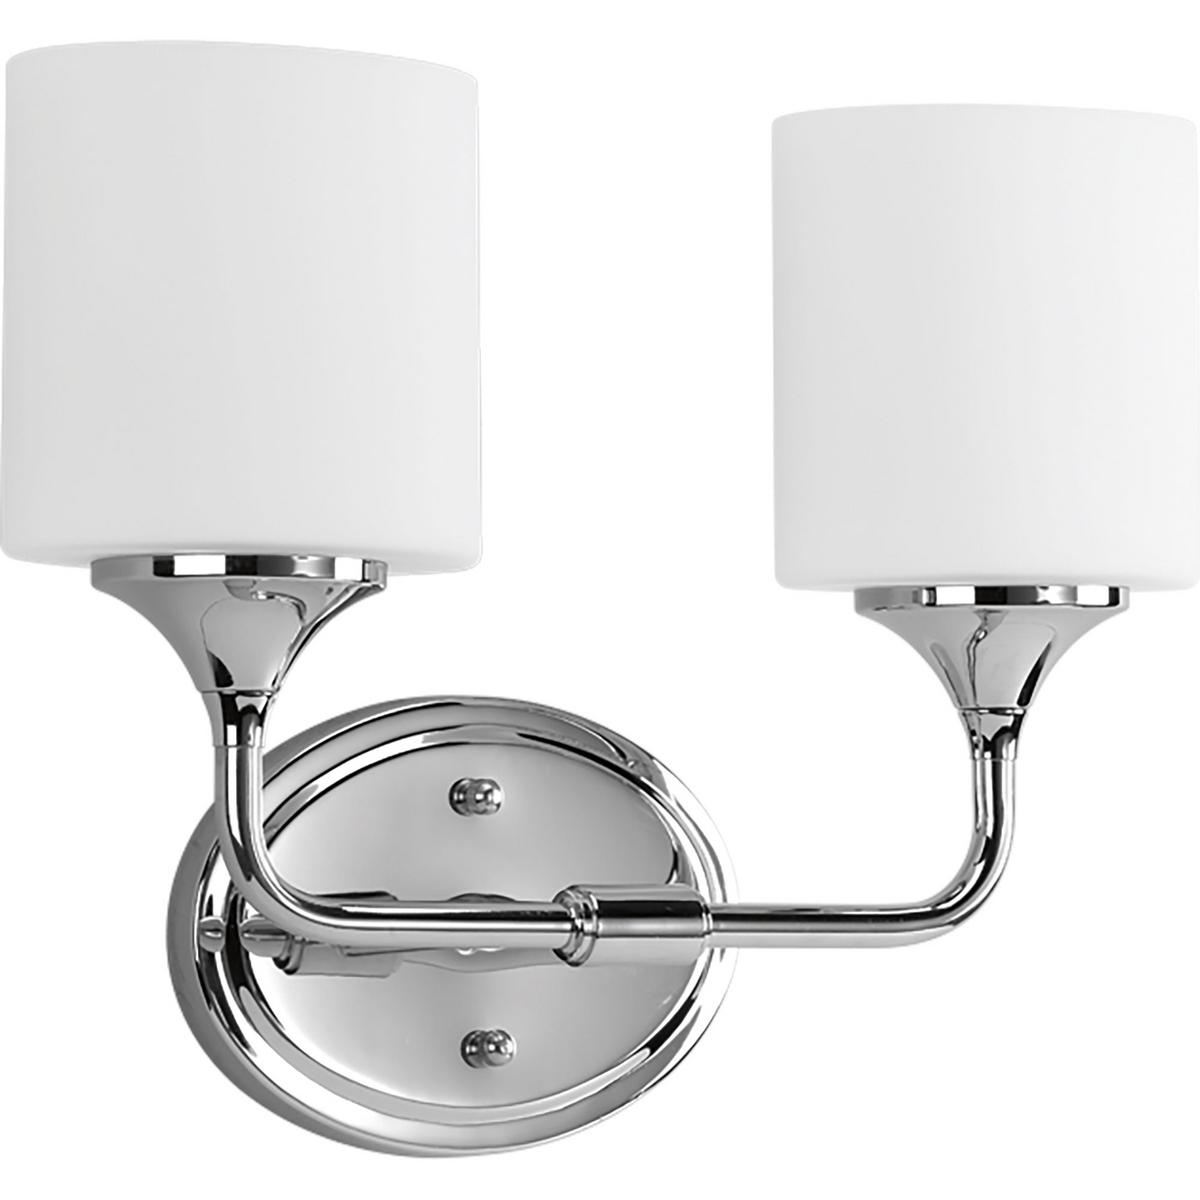 Hubbell P2802-15 With a youthful, yet timeless flair, the Lynzie Collection brightens your day with its simplicity. This two-light bath fixture with etched, white, oval shaped glass shades held upright by delicate classic Chrome finished arms portray the simple styling. A